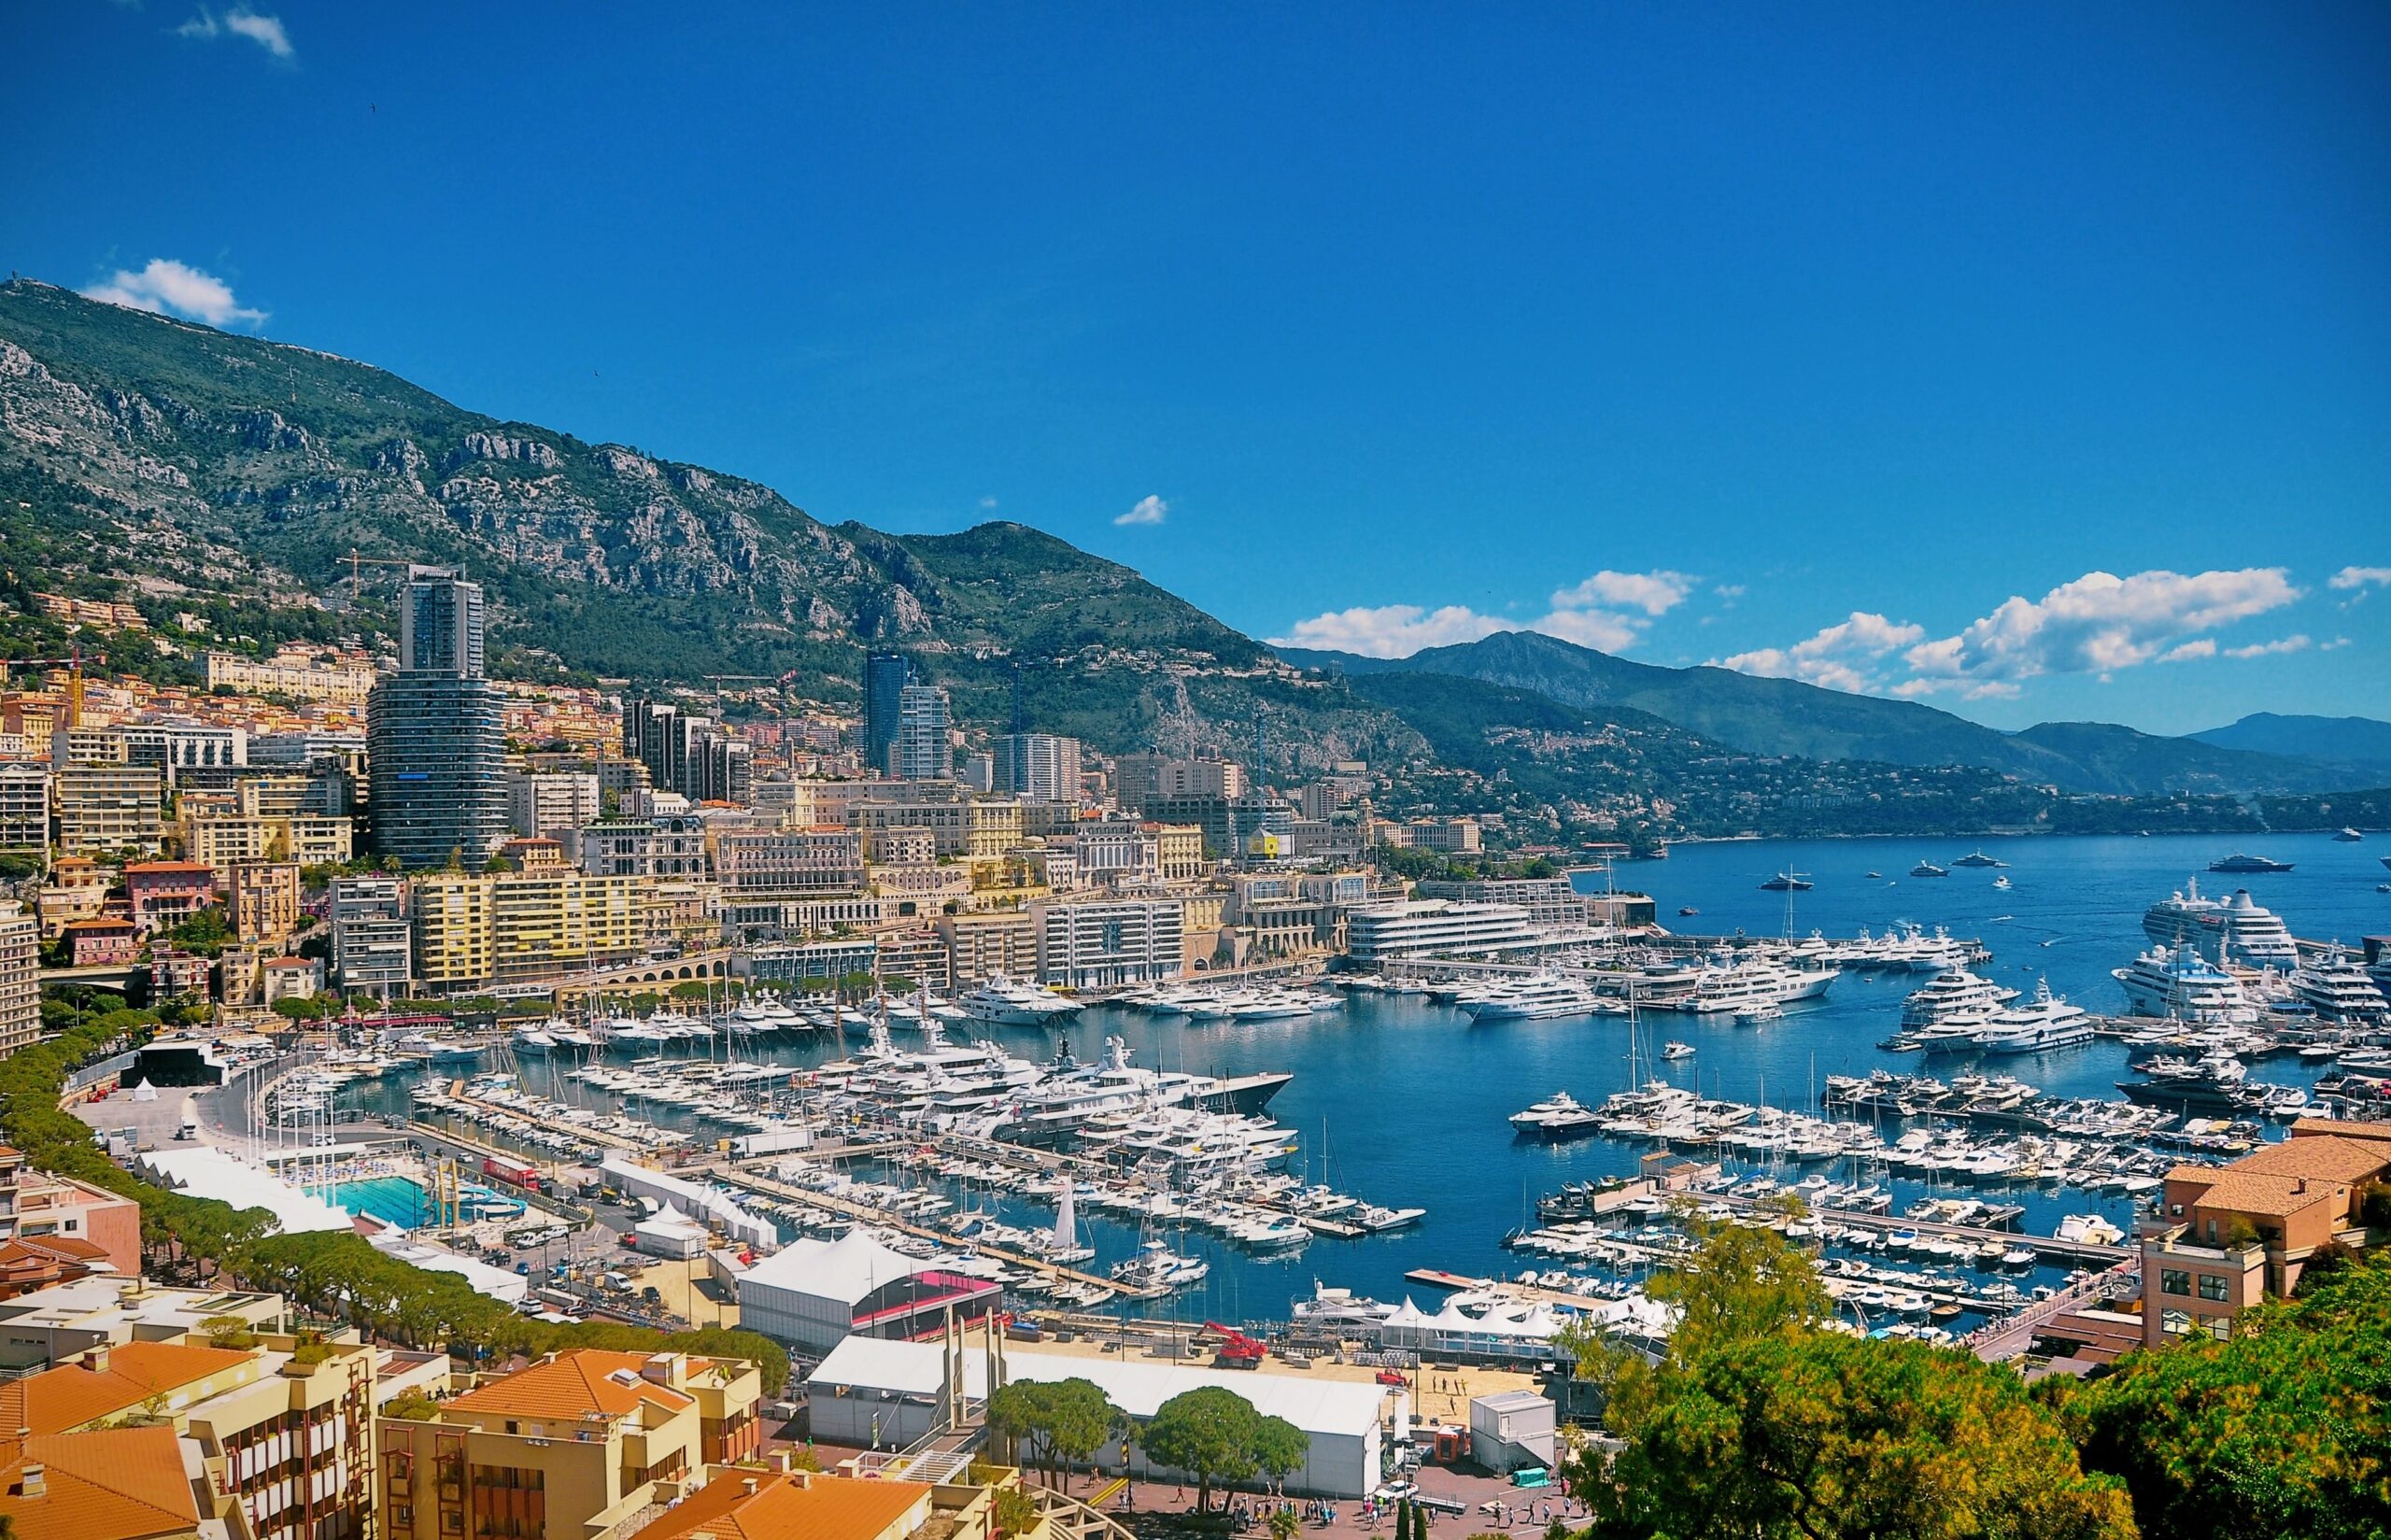 A typical weekend in Monaco